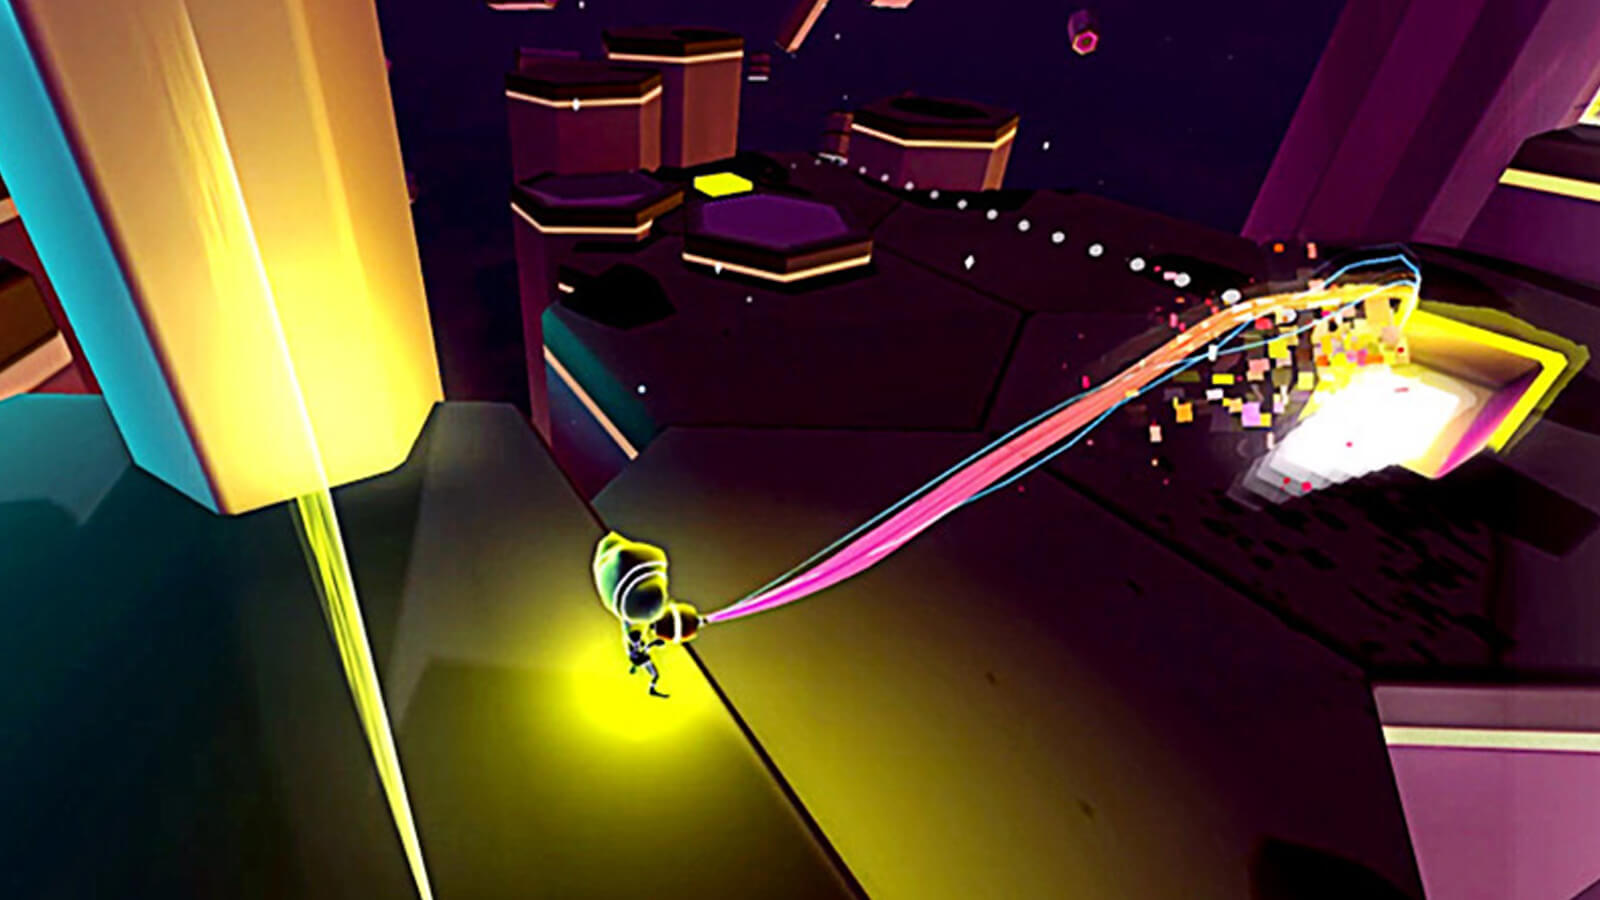 The player's weapon emanates a multicolored ray at a block of glowing material